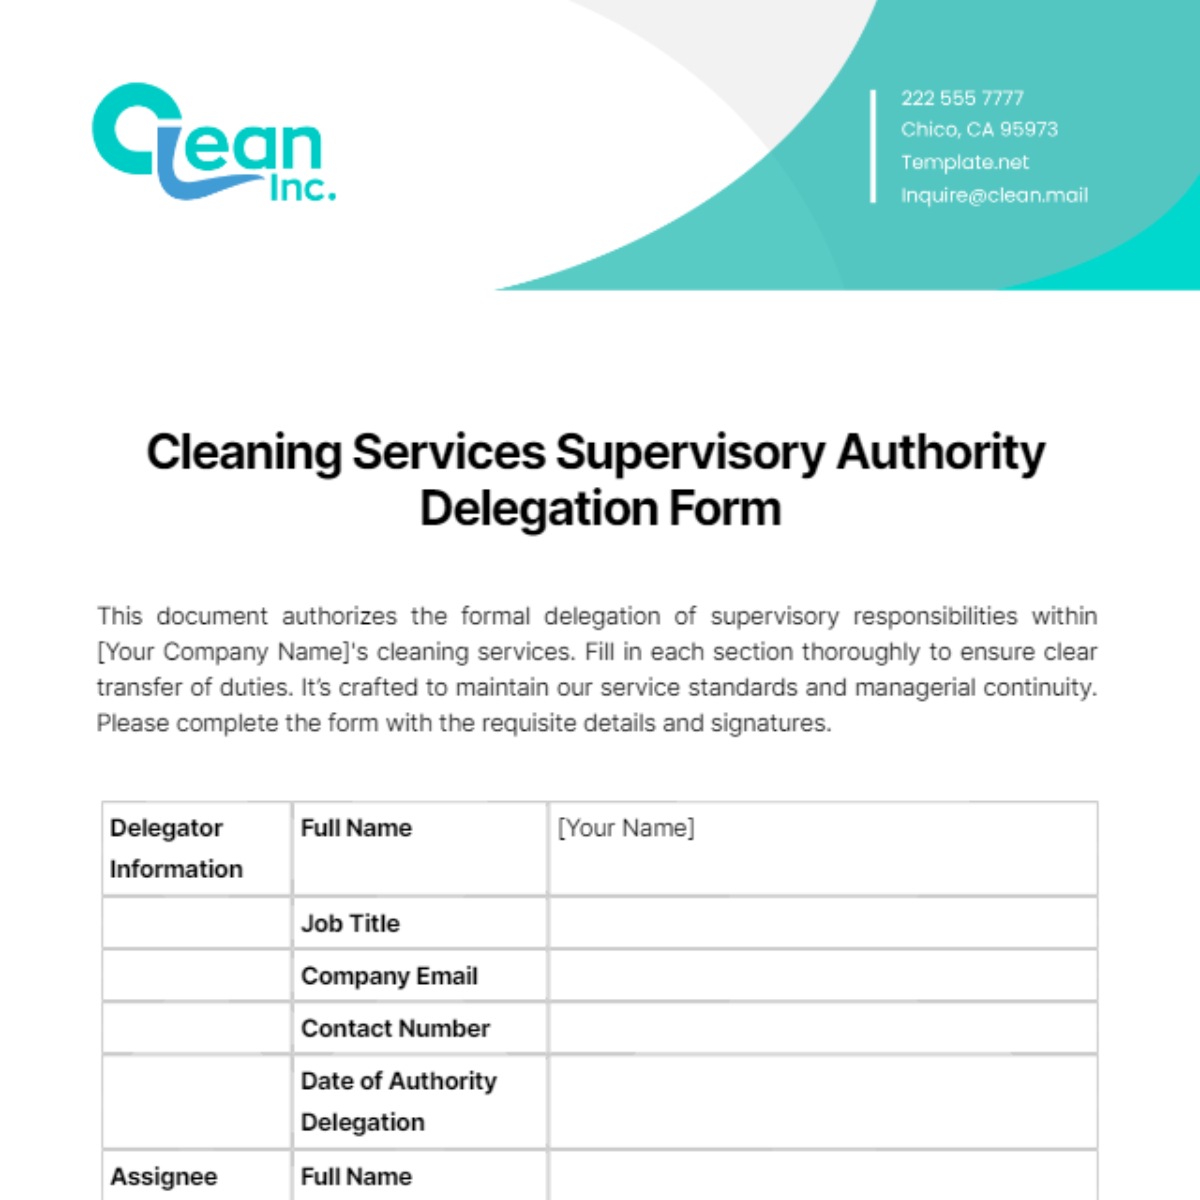 Cleaning Services Supervisory Authority Delegation Form Template